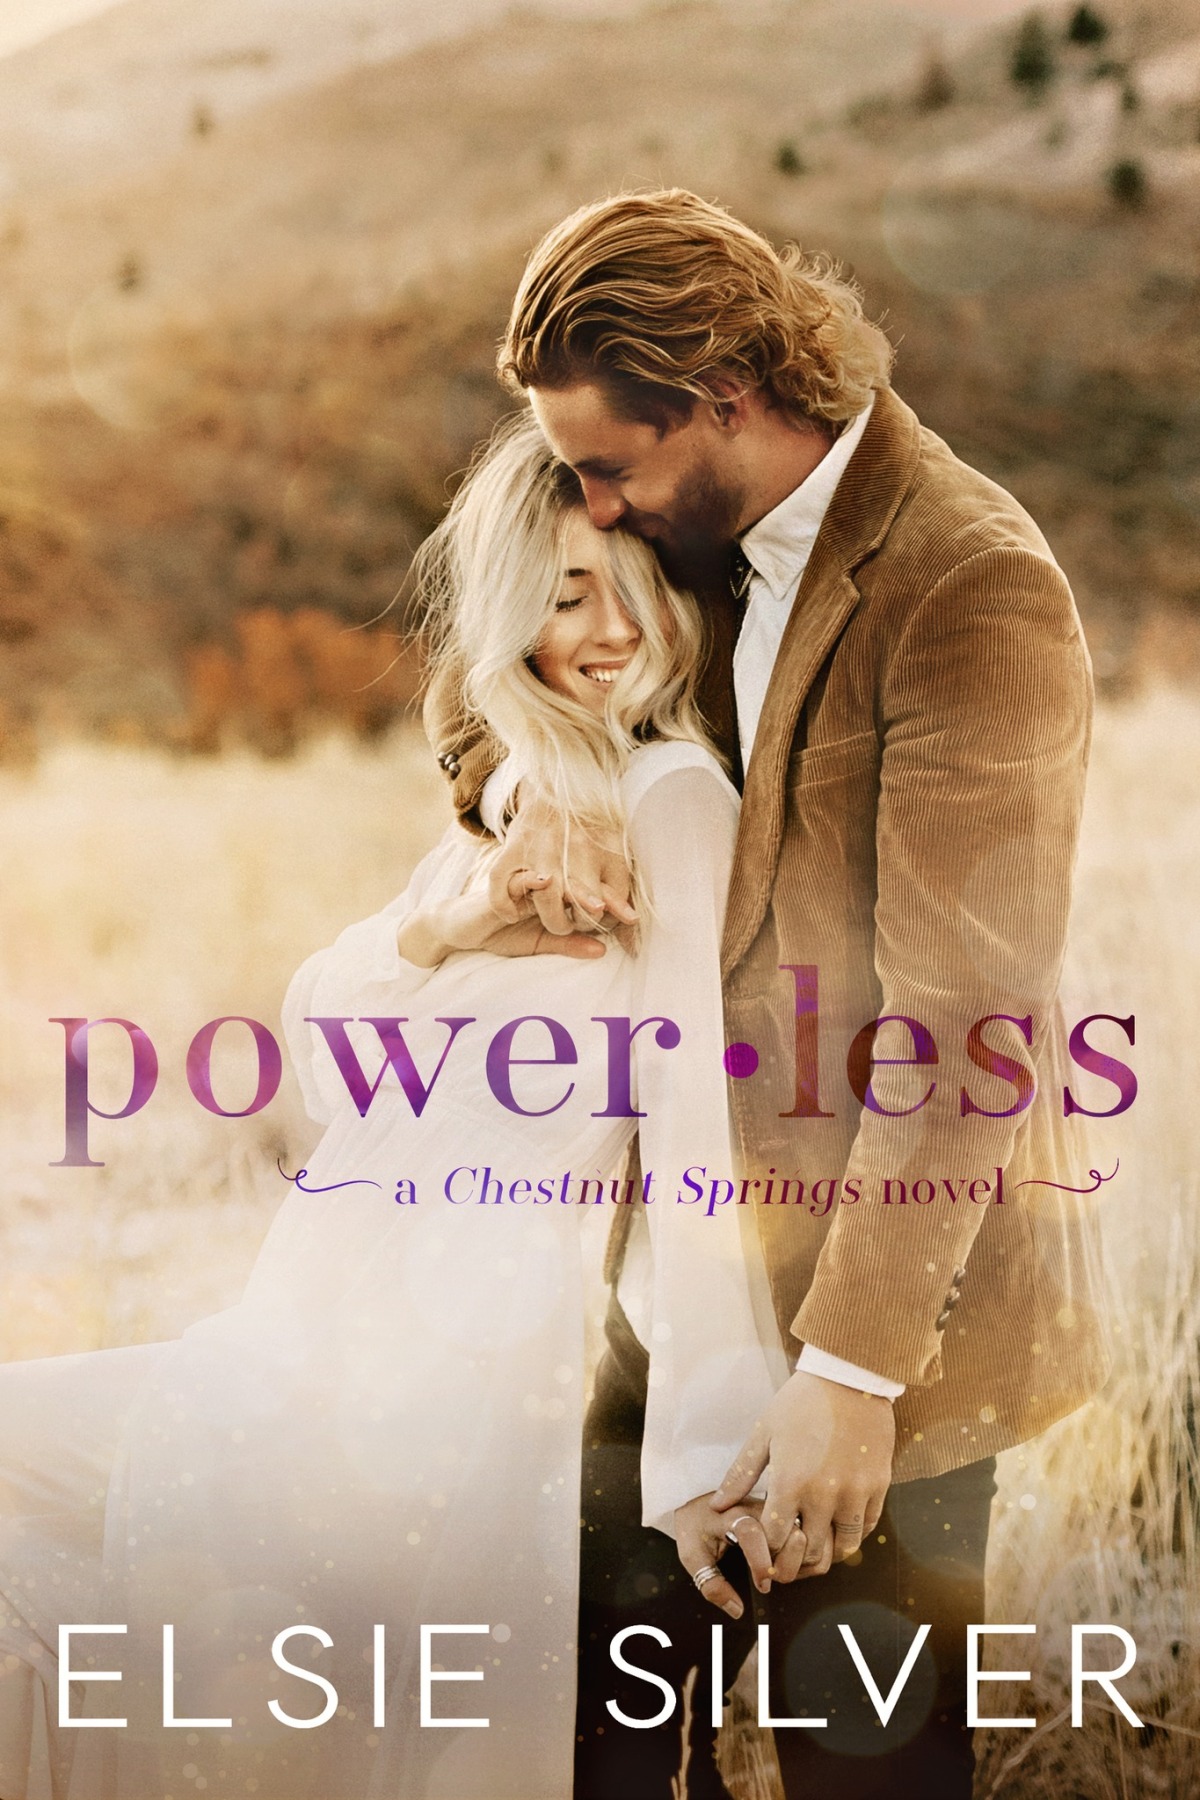 Third book in the series? Check! Powerless by Elsie Silver (Chestnut Springs #3)   #bookreview #romance #SmallTown